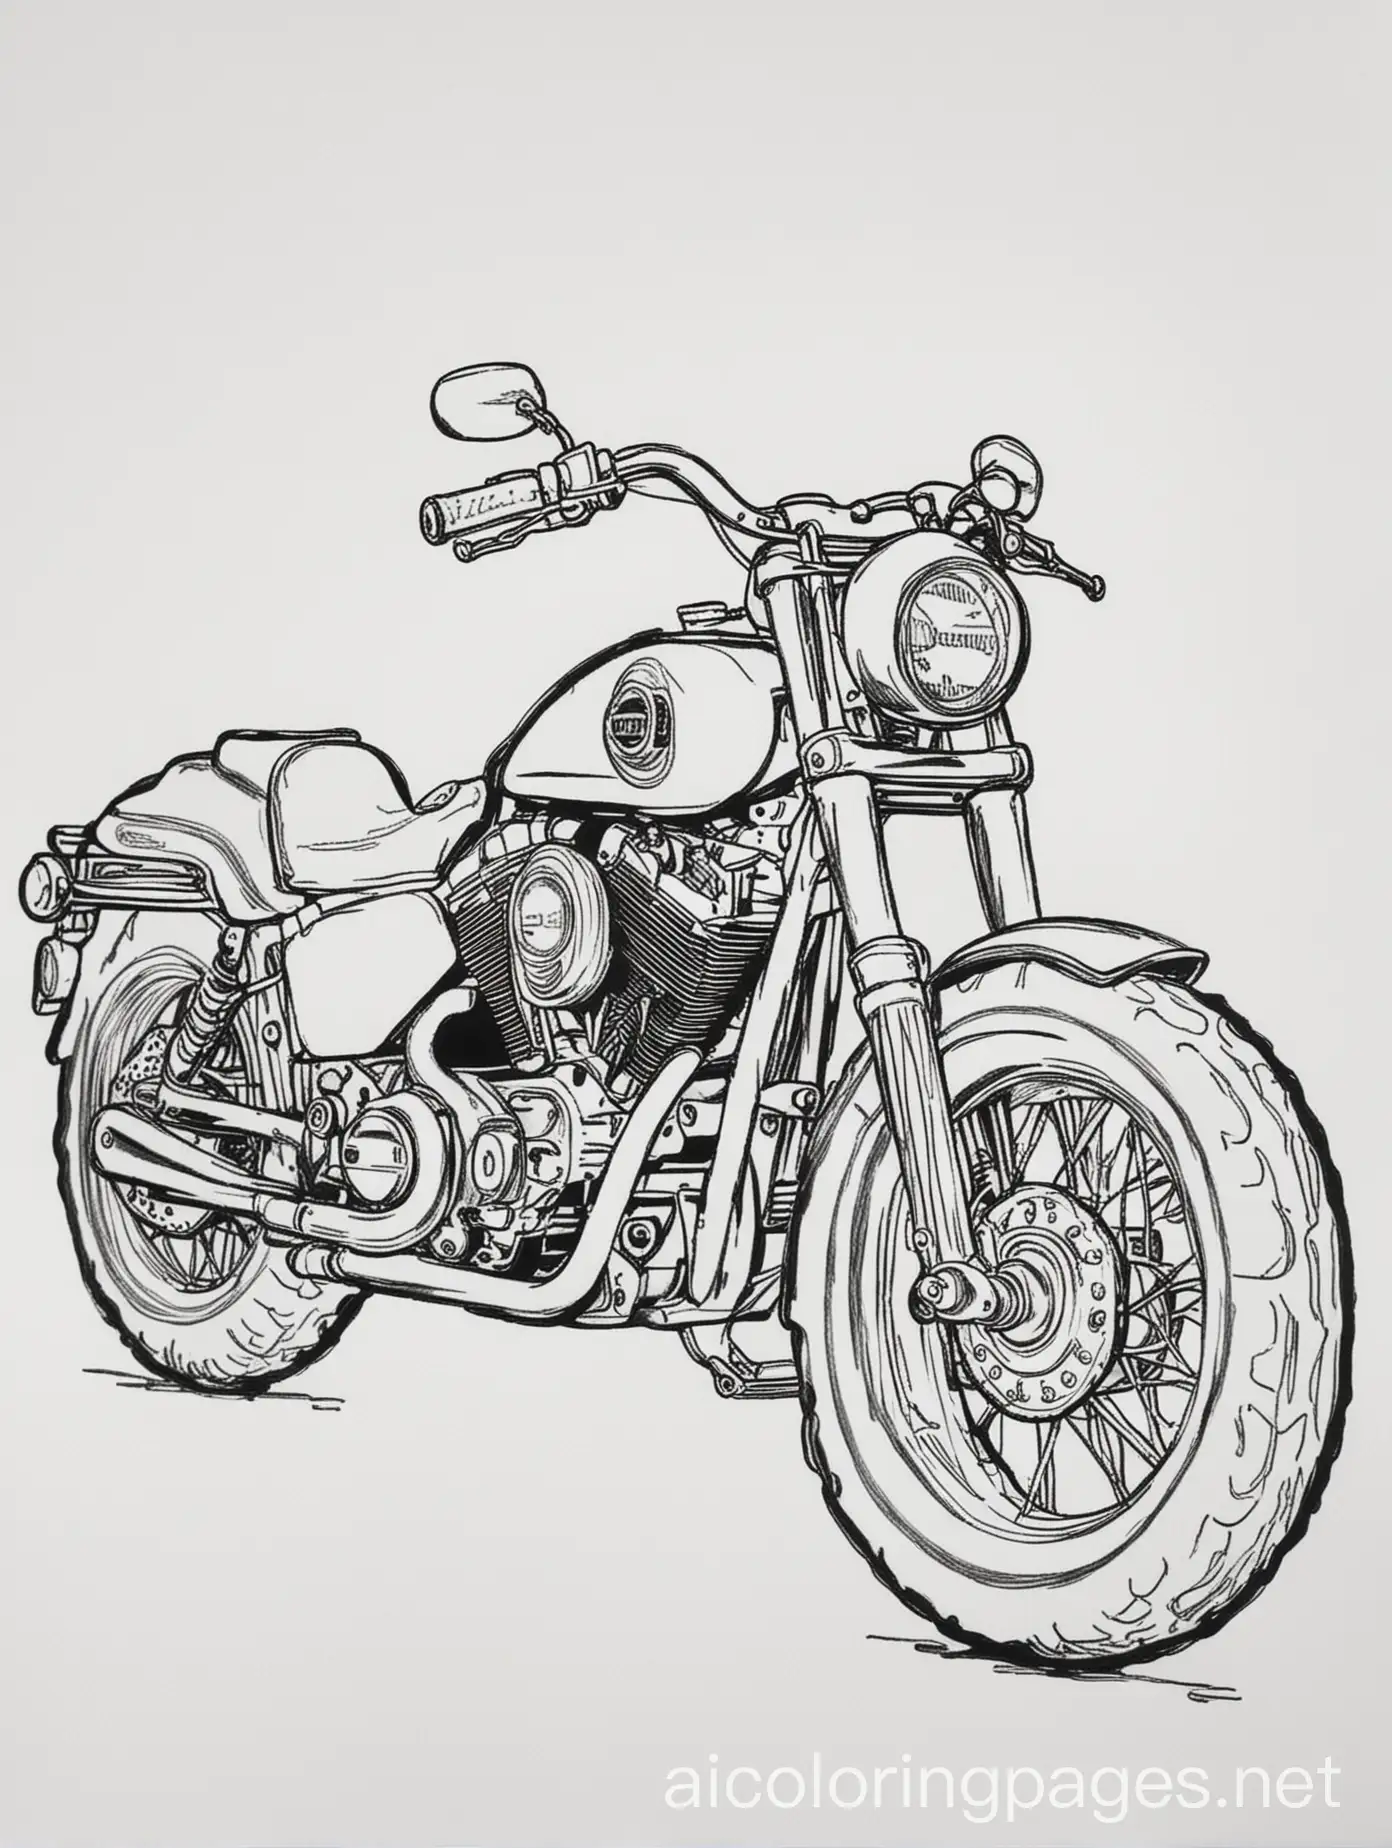 simple coloring page big harley motorcycle chrome fancy scenery driving winding road background design, Coloring Page, black and white, line art, white background, Simplicity, Ample White Space. The background of the coloring page is plain white to make it easy for young children to color within the lines. The outlines of all the subjects are easy to distinguish, making it simple for kids to color without too much difficulty, Coloring Page, black and white, line art, white background, Simplicity, Ample White Space. The background of the coloring page is plain white to make it easy for young children to color within the lines. The outlines of all the subjects are easy to distinguish, making it simple for kids to color without too much difficulty, Coloring Page, black and white, line art, white background, Simplicity, Ample White Space. The background of the coloring page is plain white to make it easy for young children to color within the lines. The outlines of all the subjects are easy to distinguish, making it simple for kids to color without too much difficulty